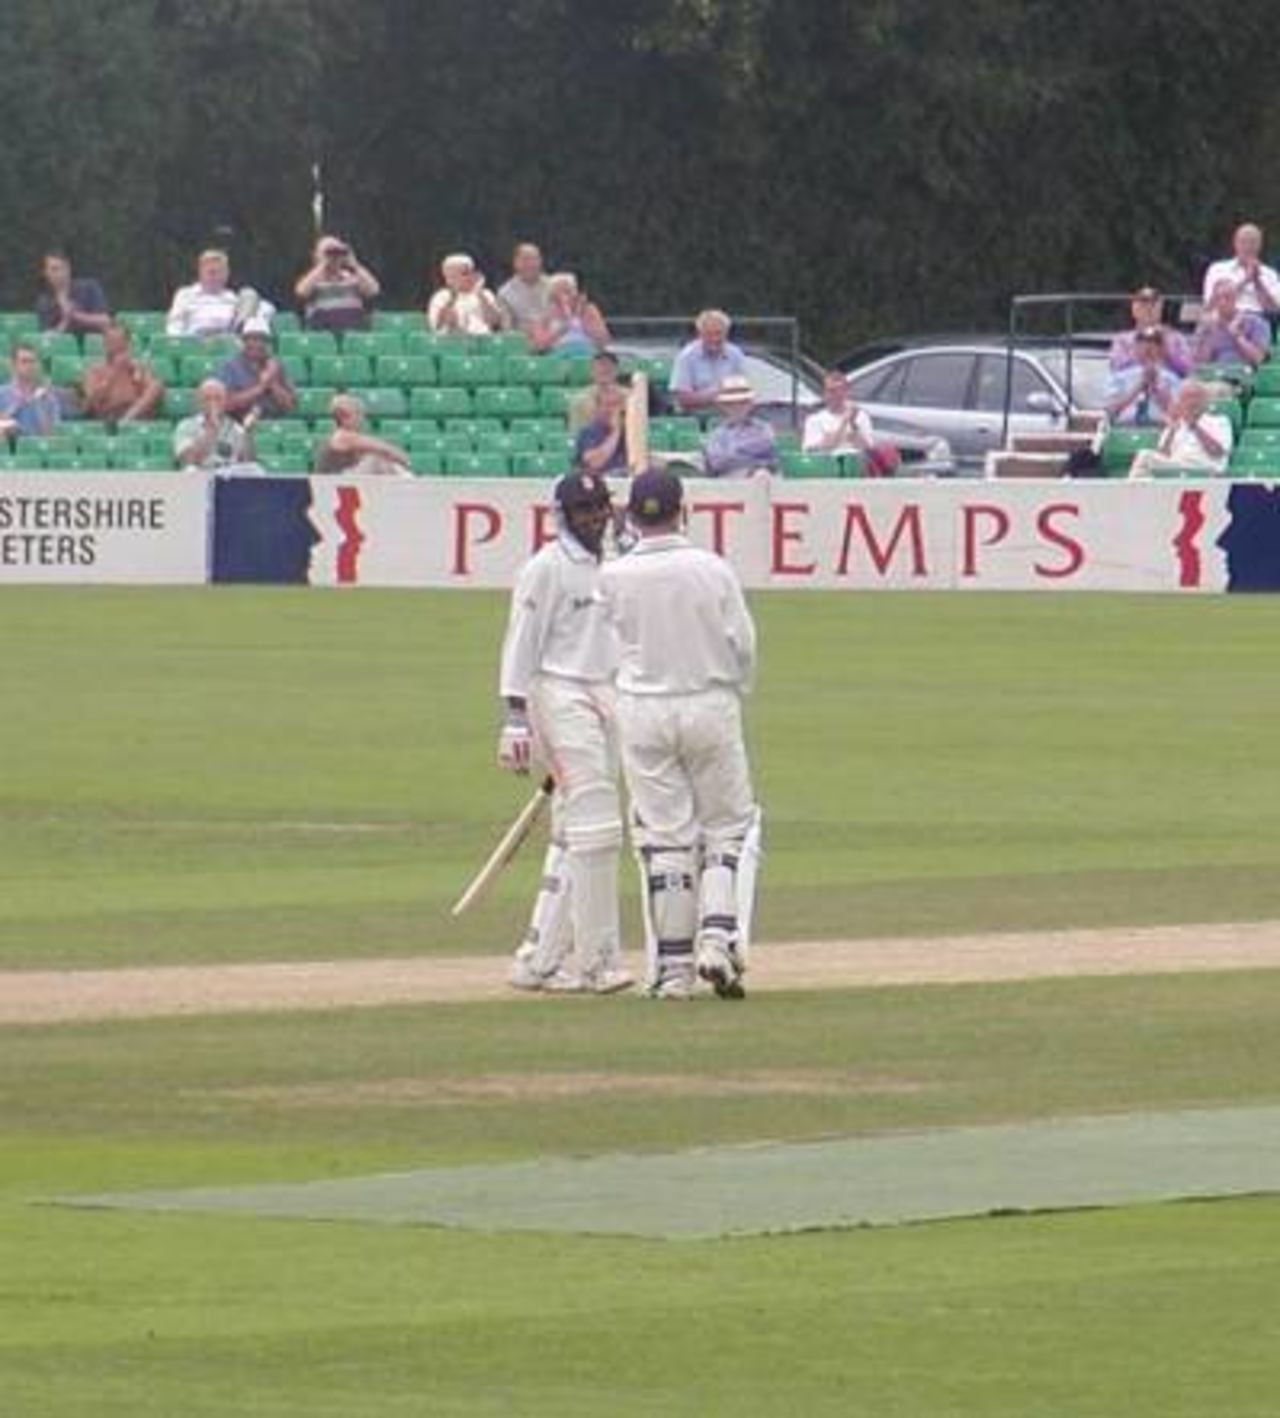 Neil Johnson is congratulated by the smiling Dimitri Mascarenhas after completing his century at Worcester.